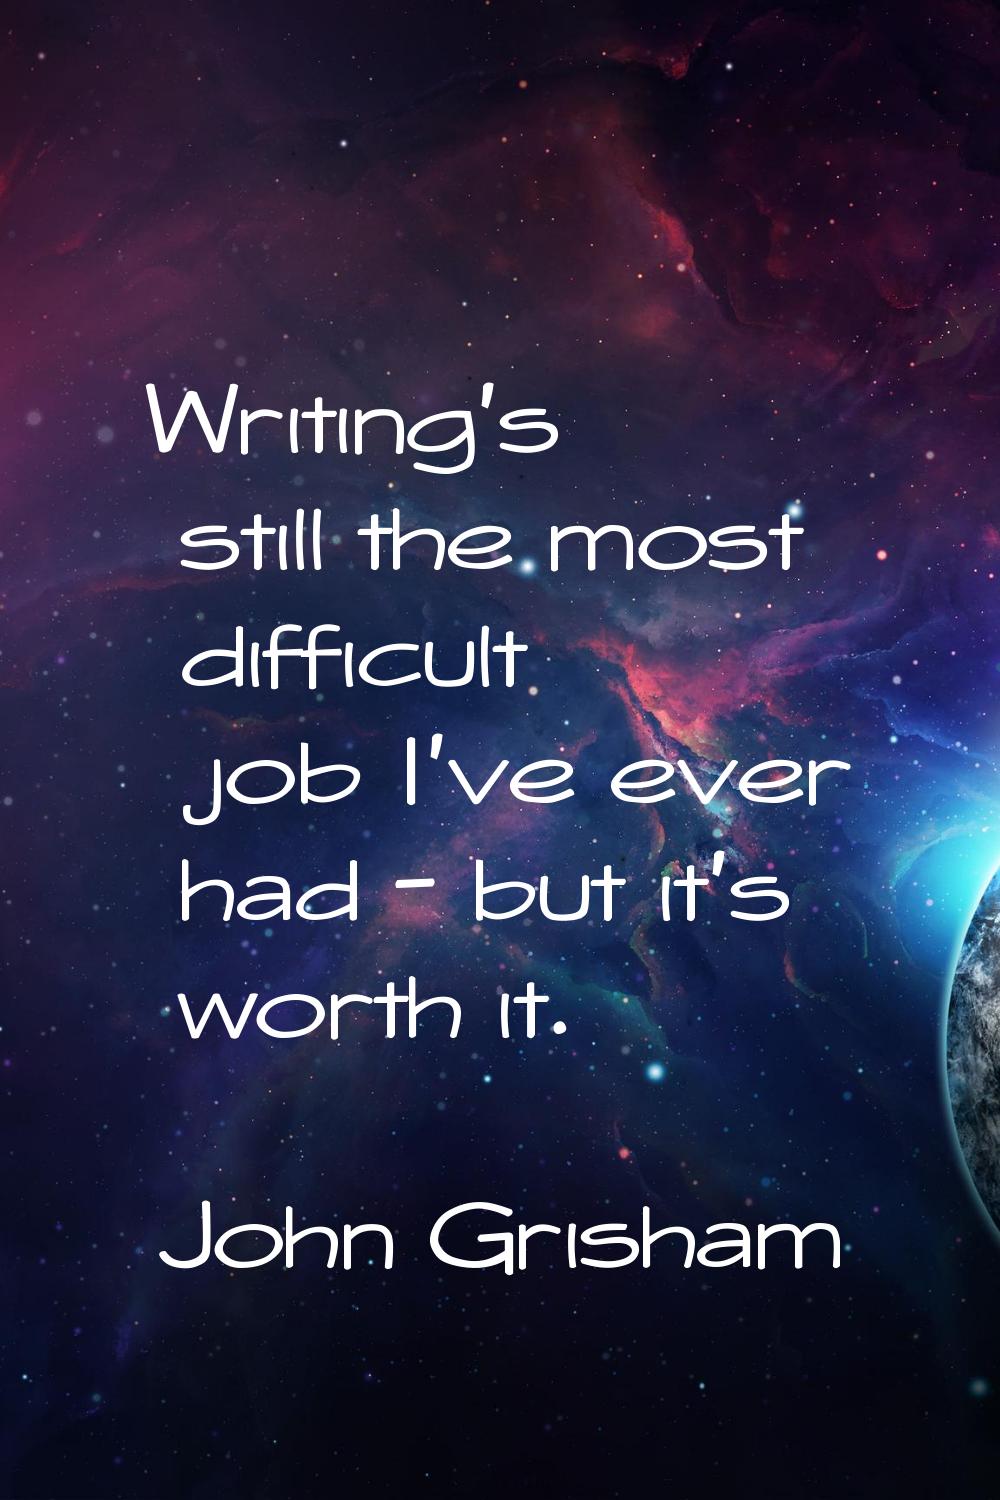 Writing's still the most difficult job I've ever had - but it's worth it.